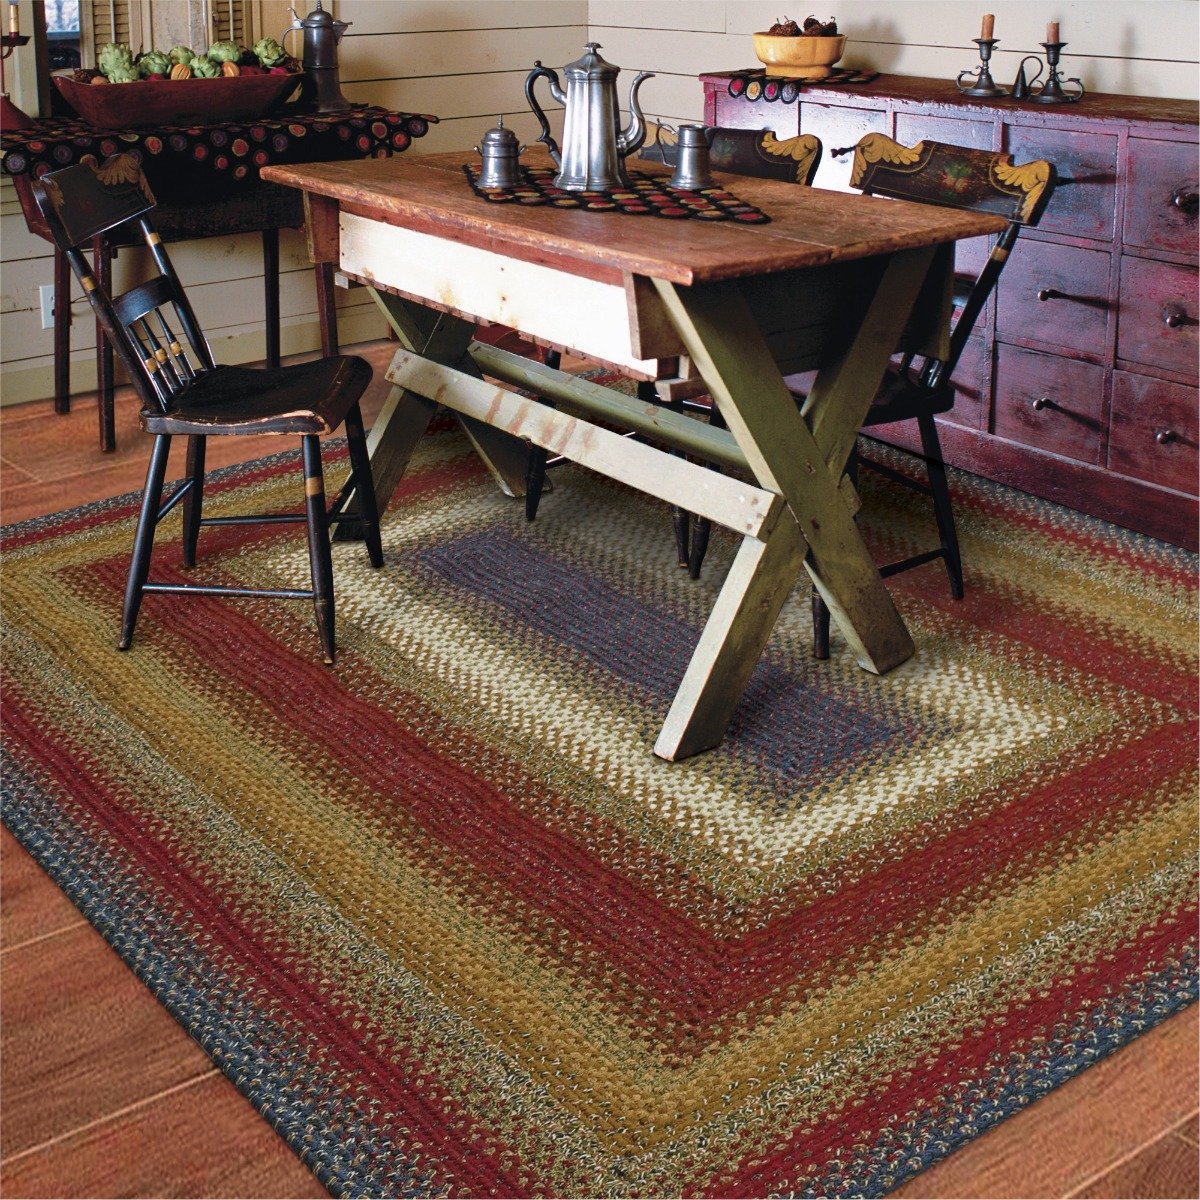 Enigma Cotton Braided Rug by Homespice